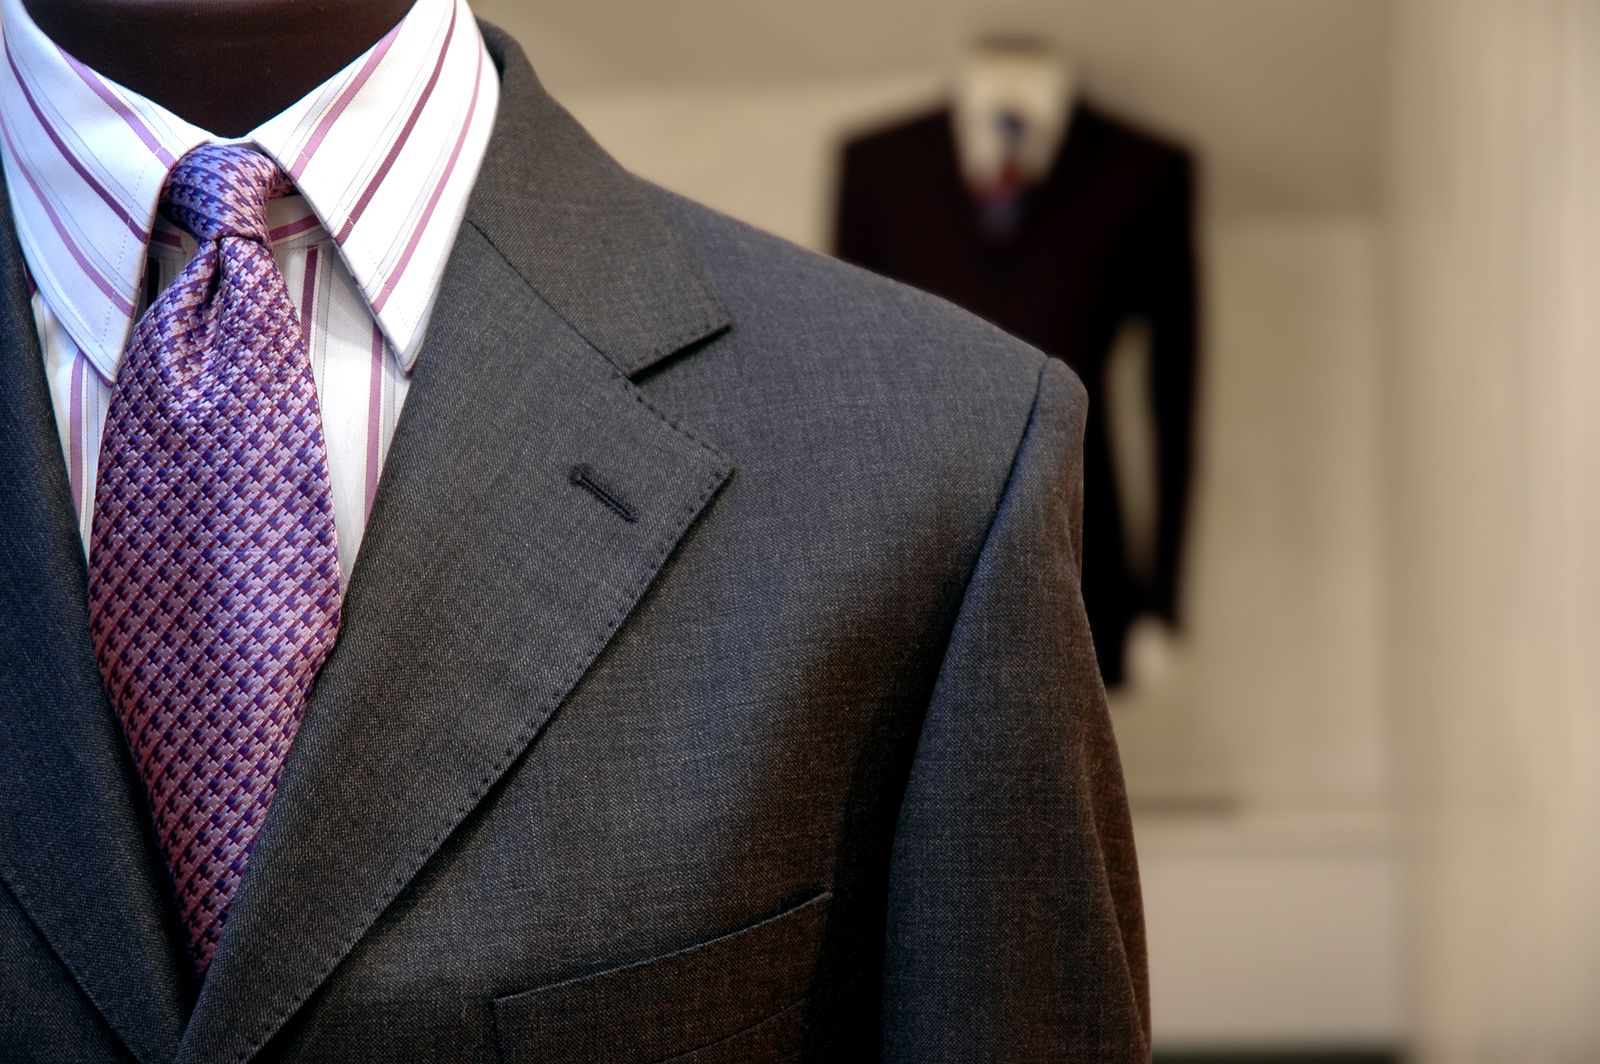 Most Expensive Suit In The World Deals Cheap, Save 49% | jlcatj.gob.mx